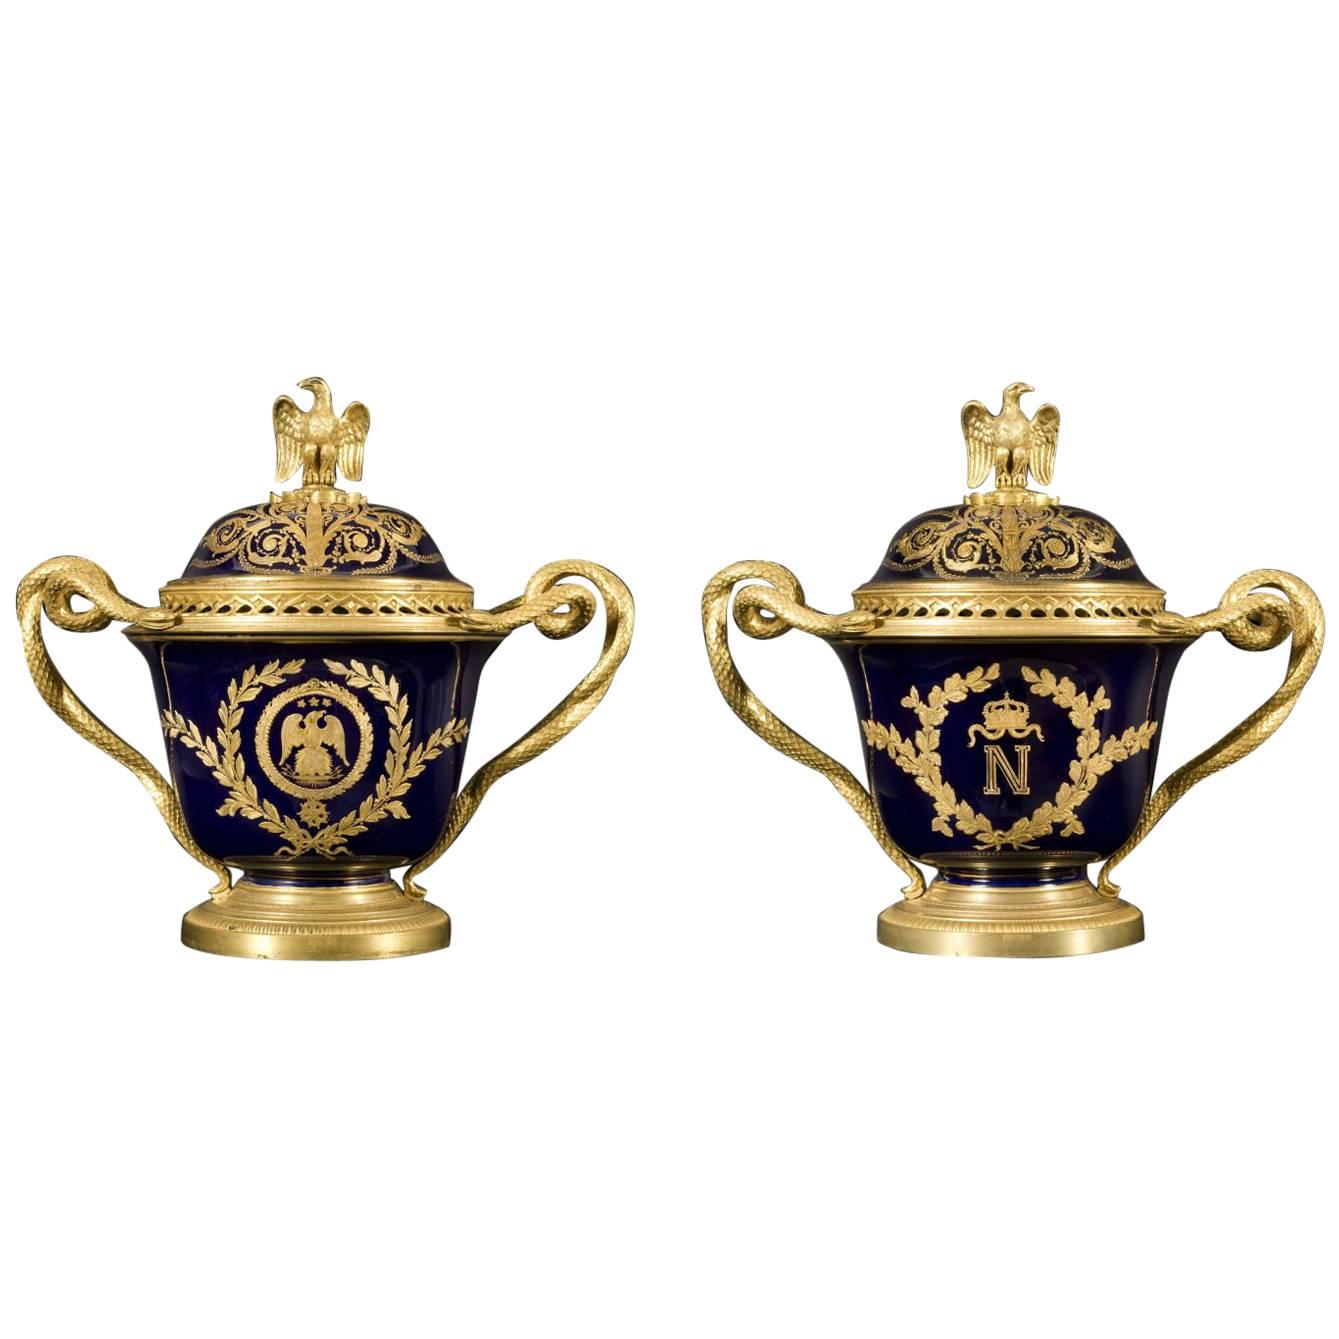 Pair of Ormolu-Mounted, Blue Glazed and Gilt Imperial Sèvres Porcelain Urns For Sale